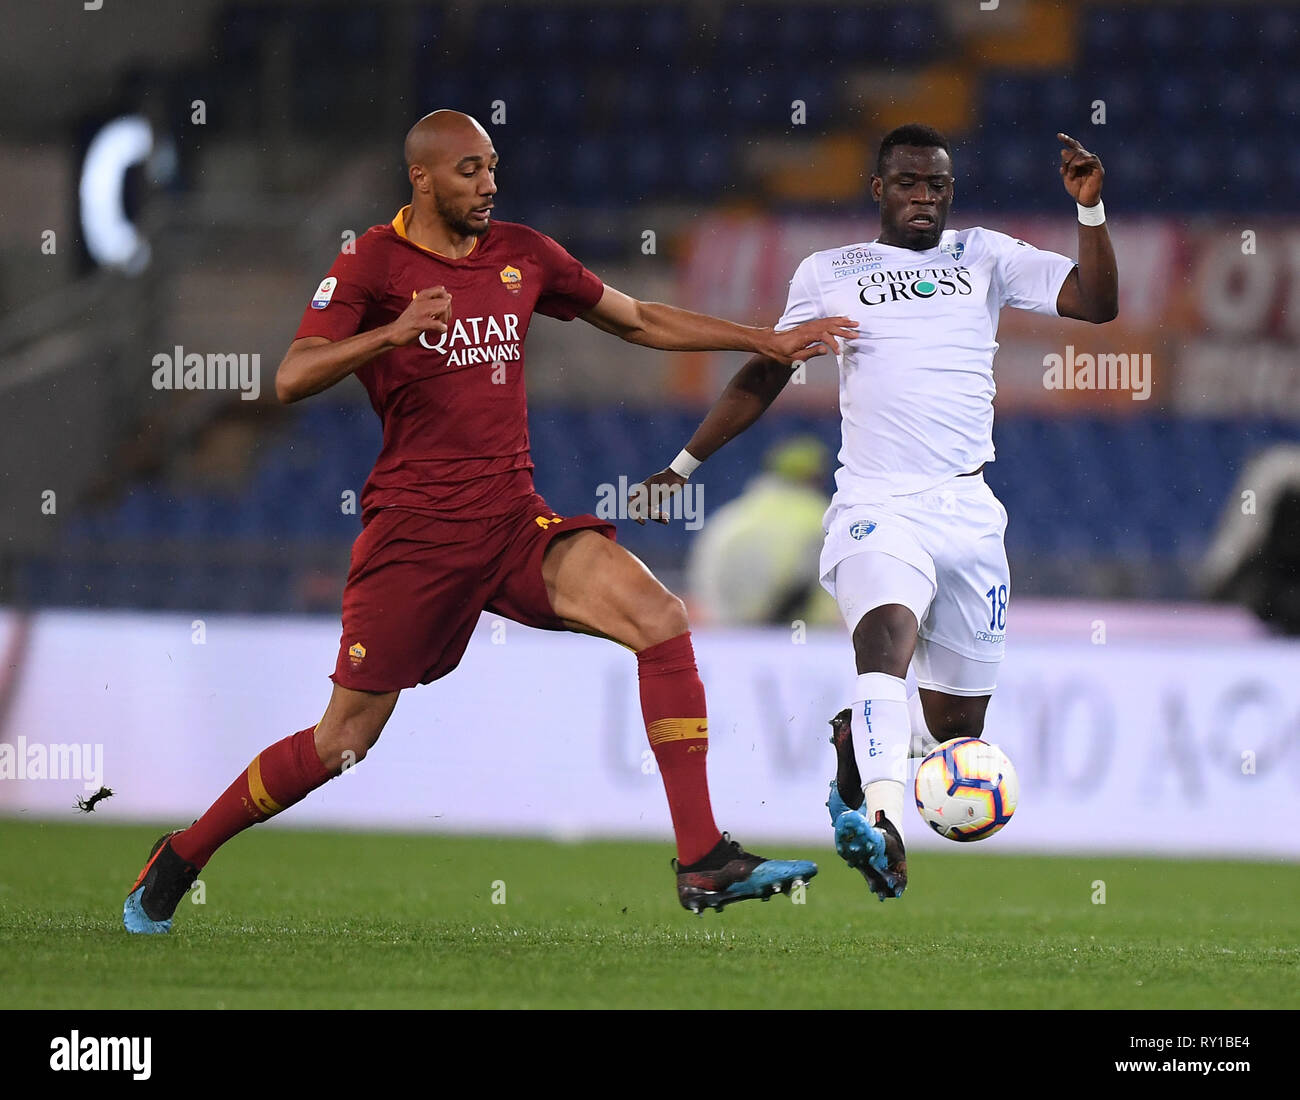 Rome, Italy. 11th Mar, 2019. Roma's Steven N'zonzi (L) vies with Empoli's Afriyie Acquah during a Serie A soccer match in Rome, Italy, March 11, 2019. Roma won 2-1. Credit: Alberto Lingria/Xinhua/Alamy Live News Stock Photo